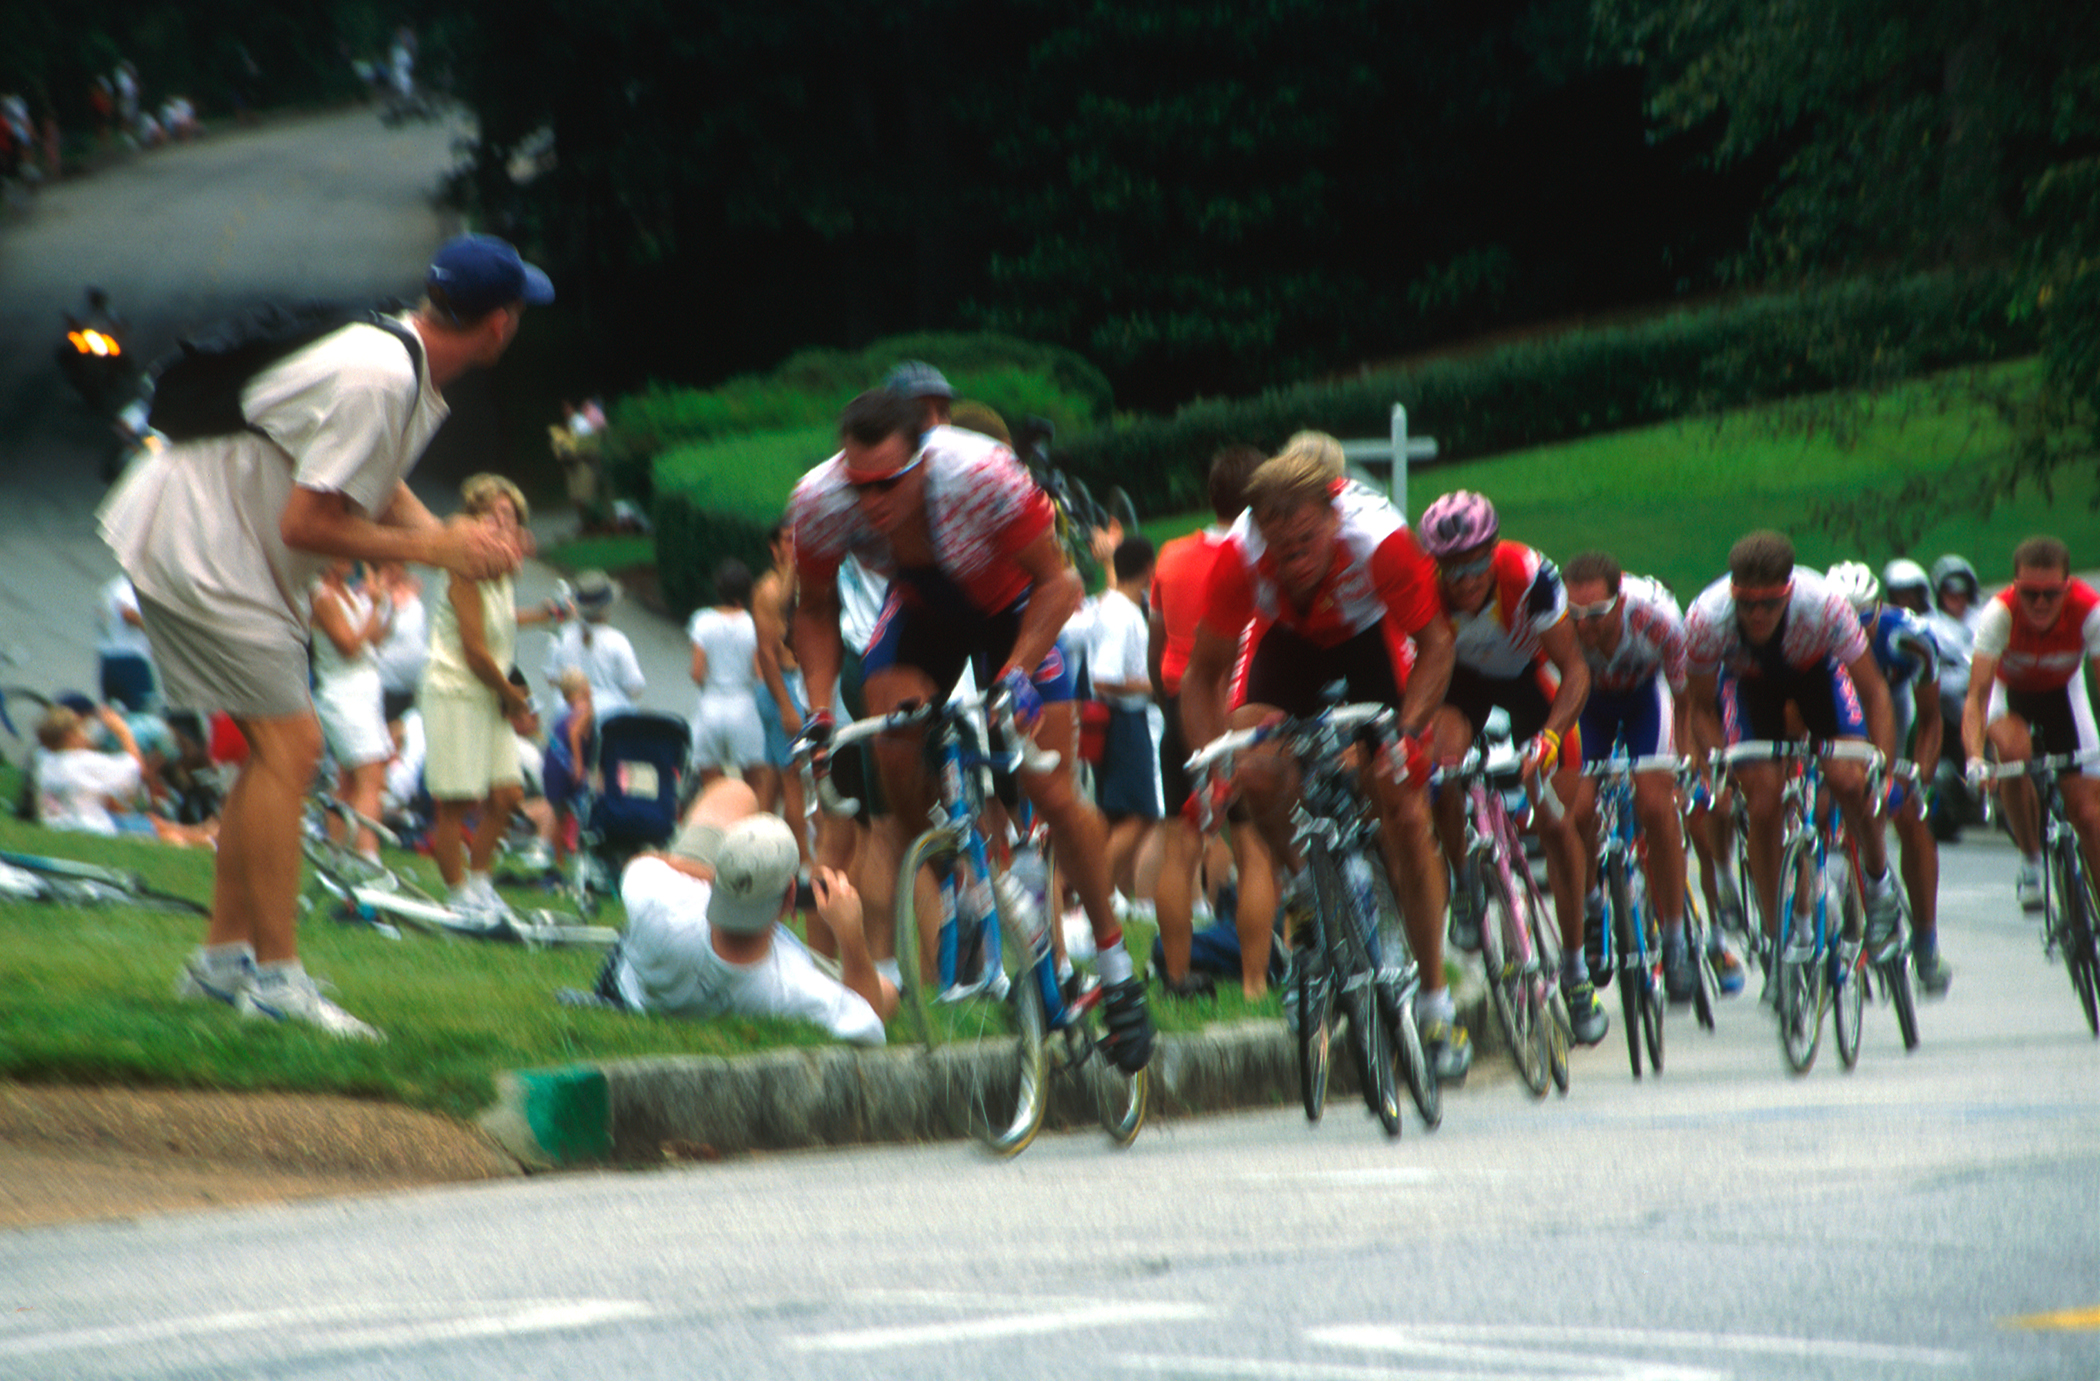  1996 Men’s Olympic Road Race. Atlanta GA. 138.7 miles at an average speed of 28.14MPH! Left to Right - Lance Armstrong - USA, Zbigniew Spruch - Poland, Melchor Mauri - Spain, Max Sciandi - Great Britain, Frankie Andreau - USA, Fabio Baldato - Italy,